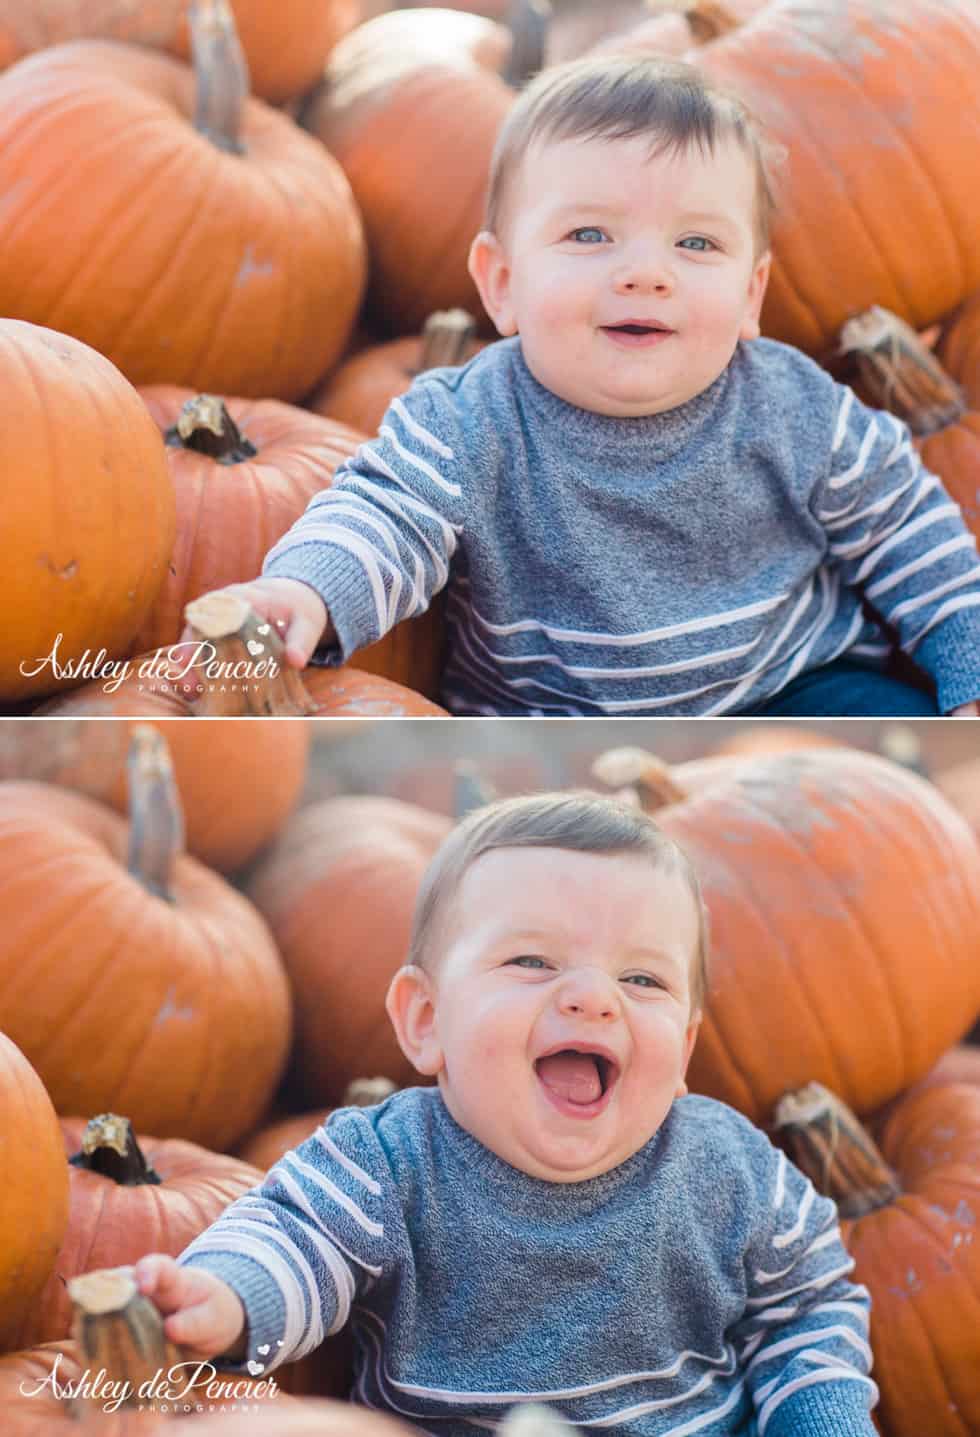 Little boy smiling and sitting with pumpkins